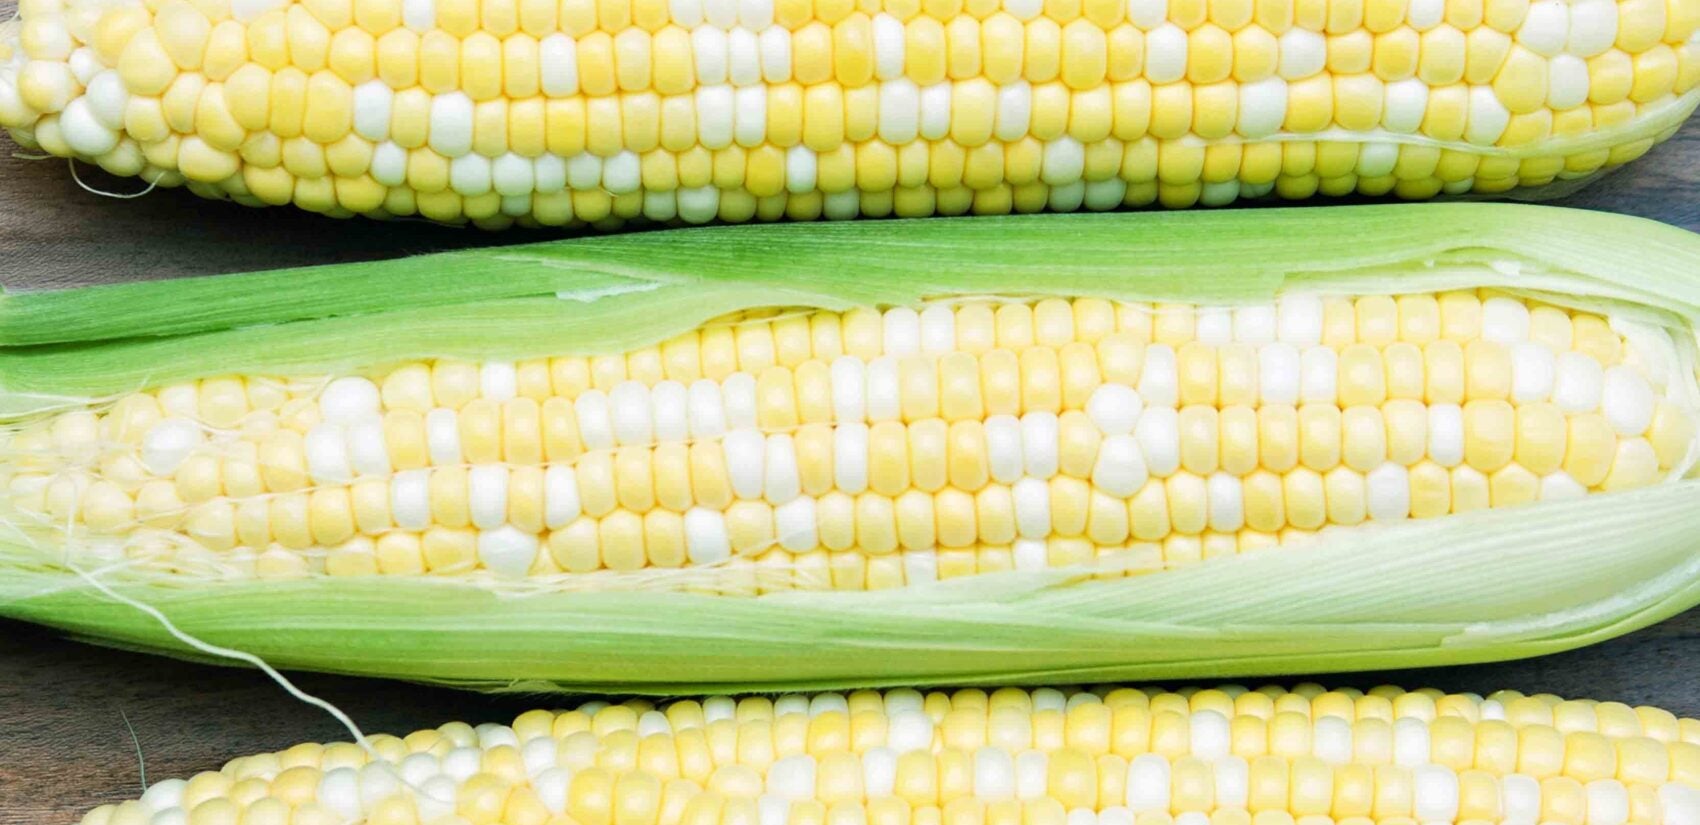 World-renowned Jersey corn will be in supermarkets in time for the Fourth of July. (New Jersey Department of Agriculture)